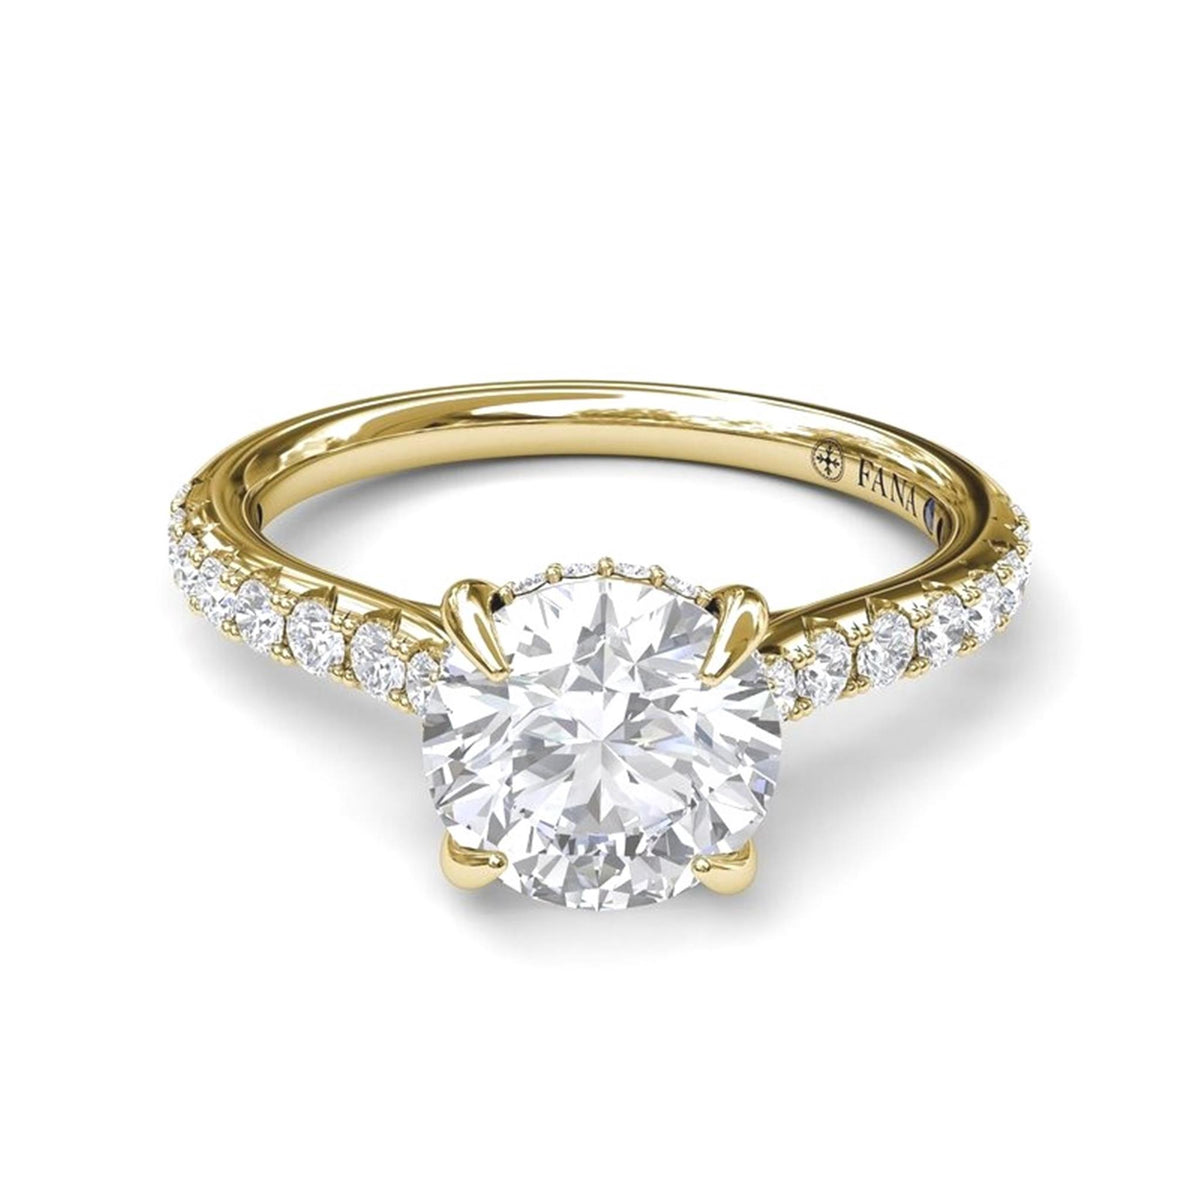 14Kt Yellow Gold Classic Prong Engagement Ring Mounting With 0.40cttw Natural Diamonds